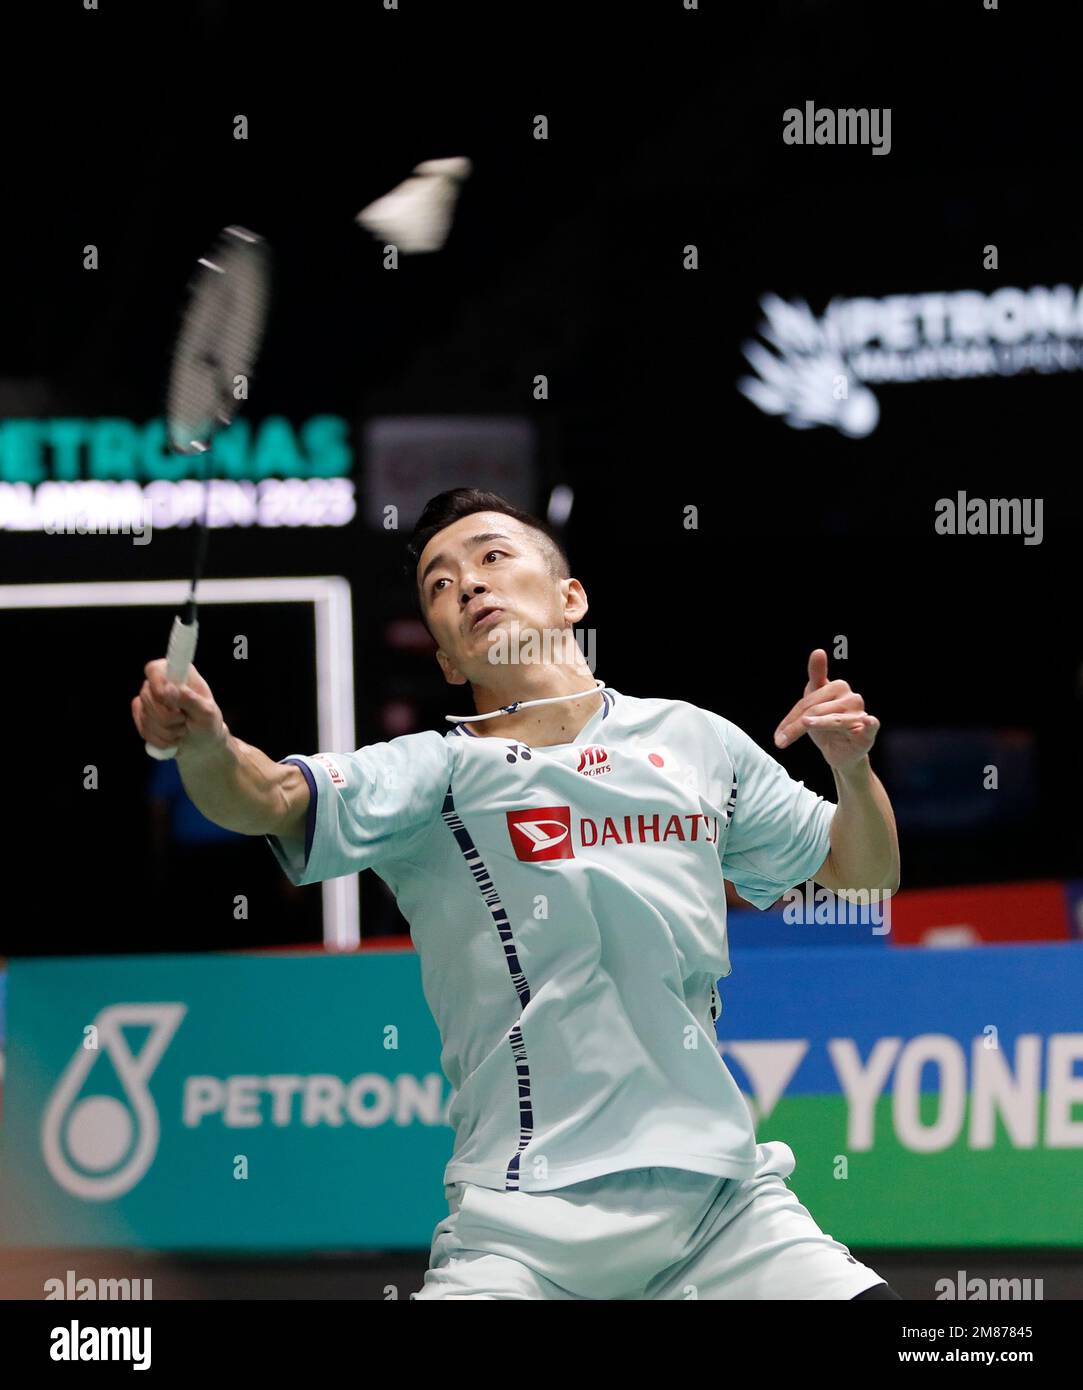 Kenta Nishimoto of Japan plays against Jonathan Christie of Indonesia during the Mens Single second round match of the Petronas Malaysia Open 2023 at Axiata Arena.Kenta Nishimoto of Japan won with scores;